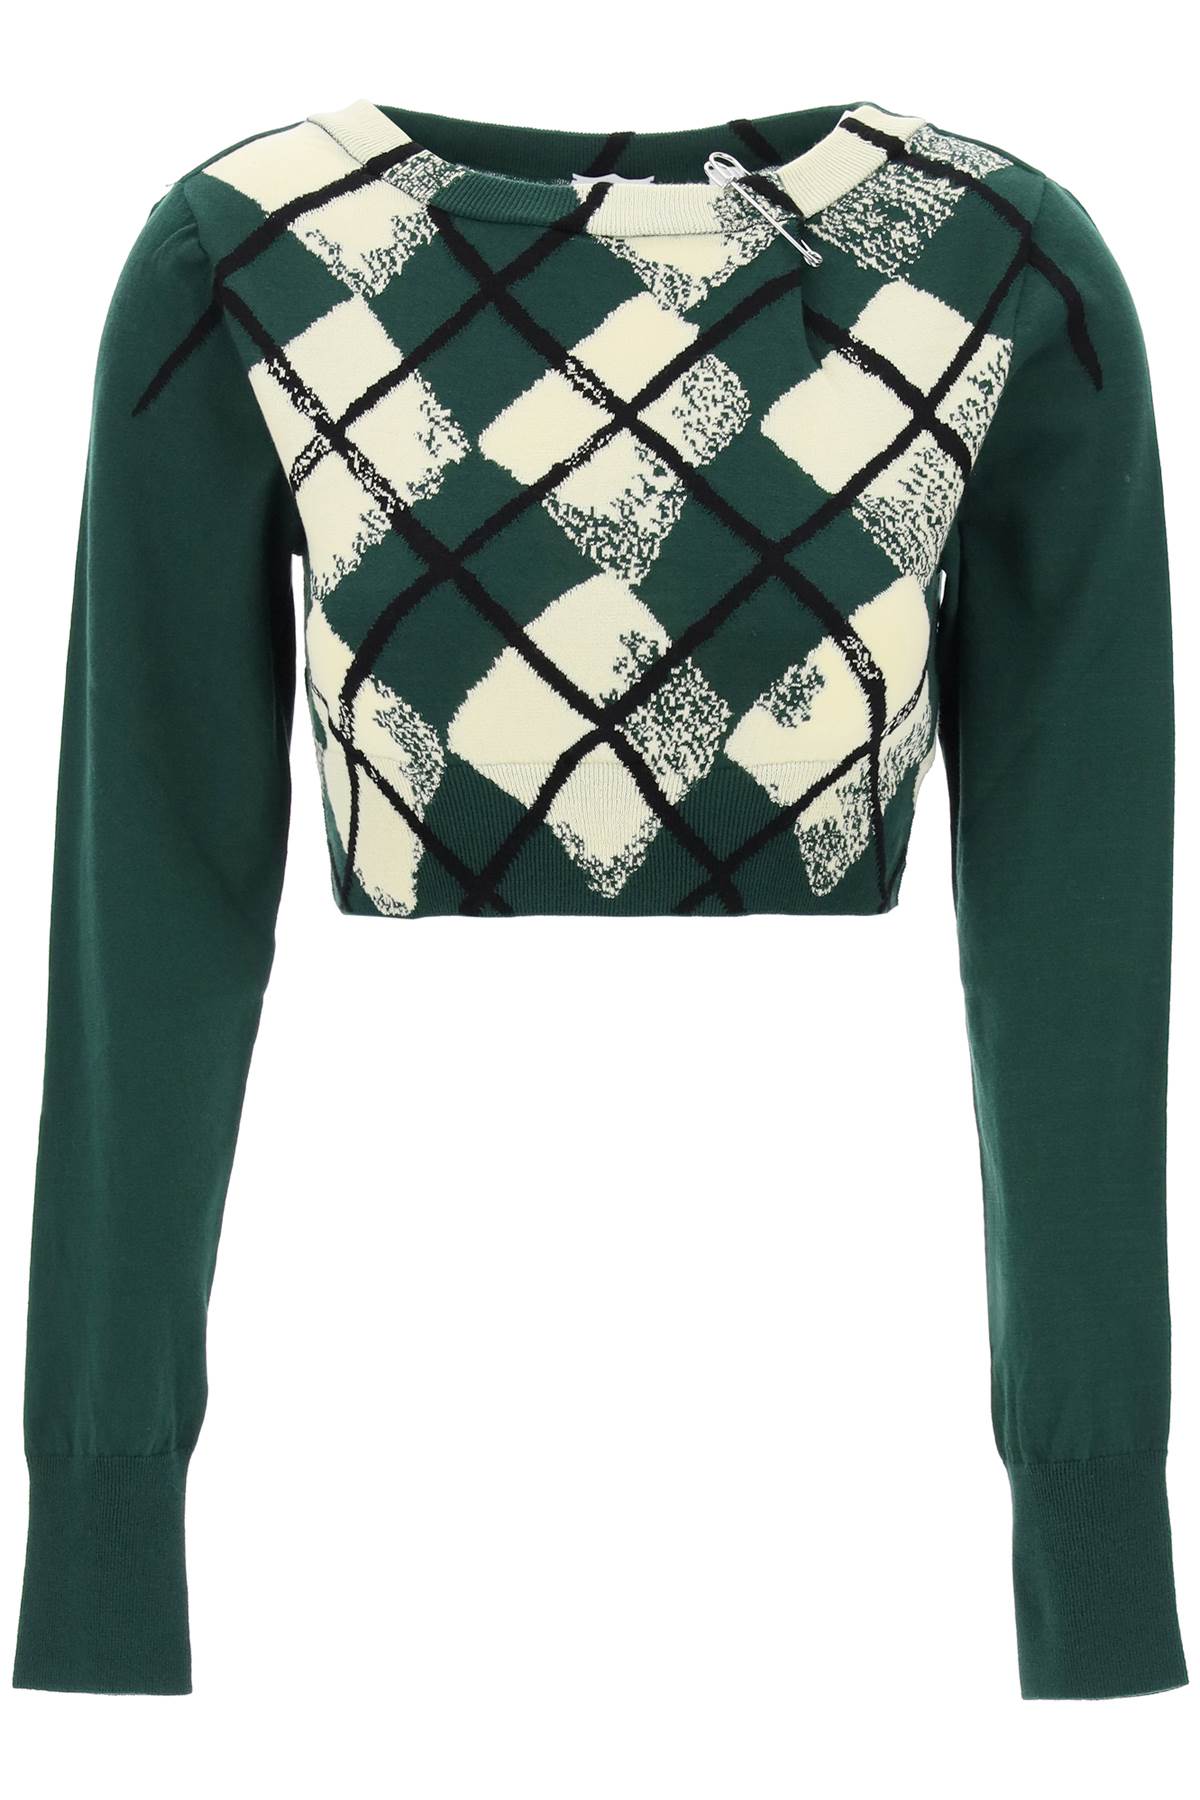 Burberry Cotton Pullover With Argyle Pattern-Pullover-Burberry-S-Urbanheer